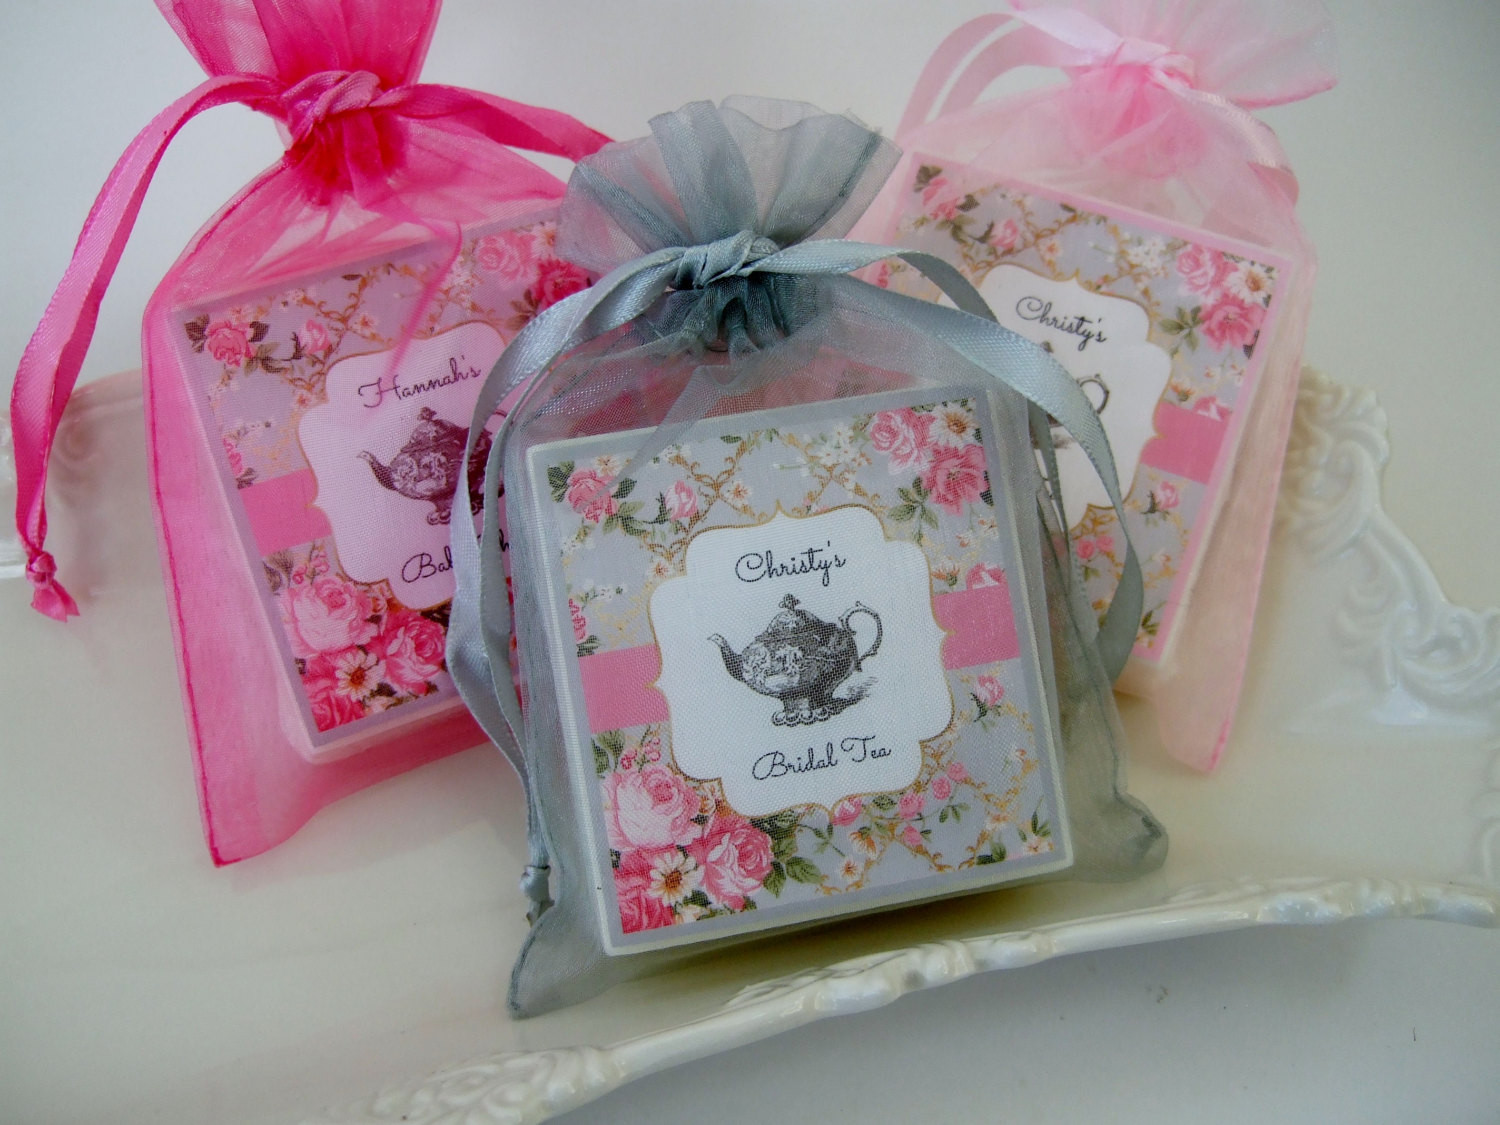 Party Favor Ideas For Baby Shower
 Tea Party Bridal Shower Favors Baby shower favors set of